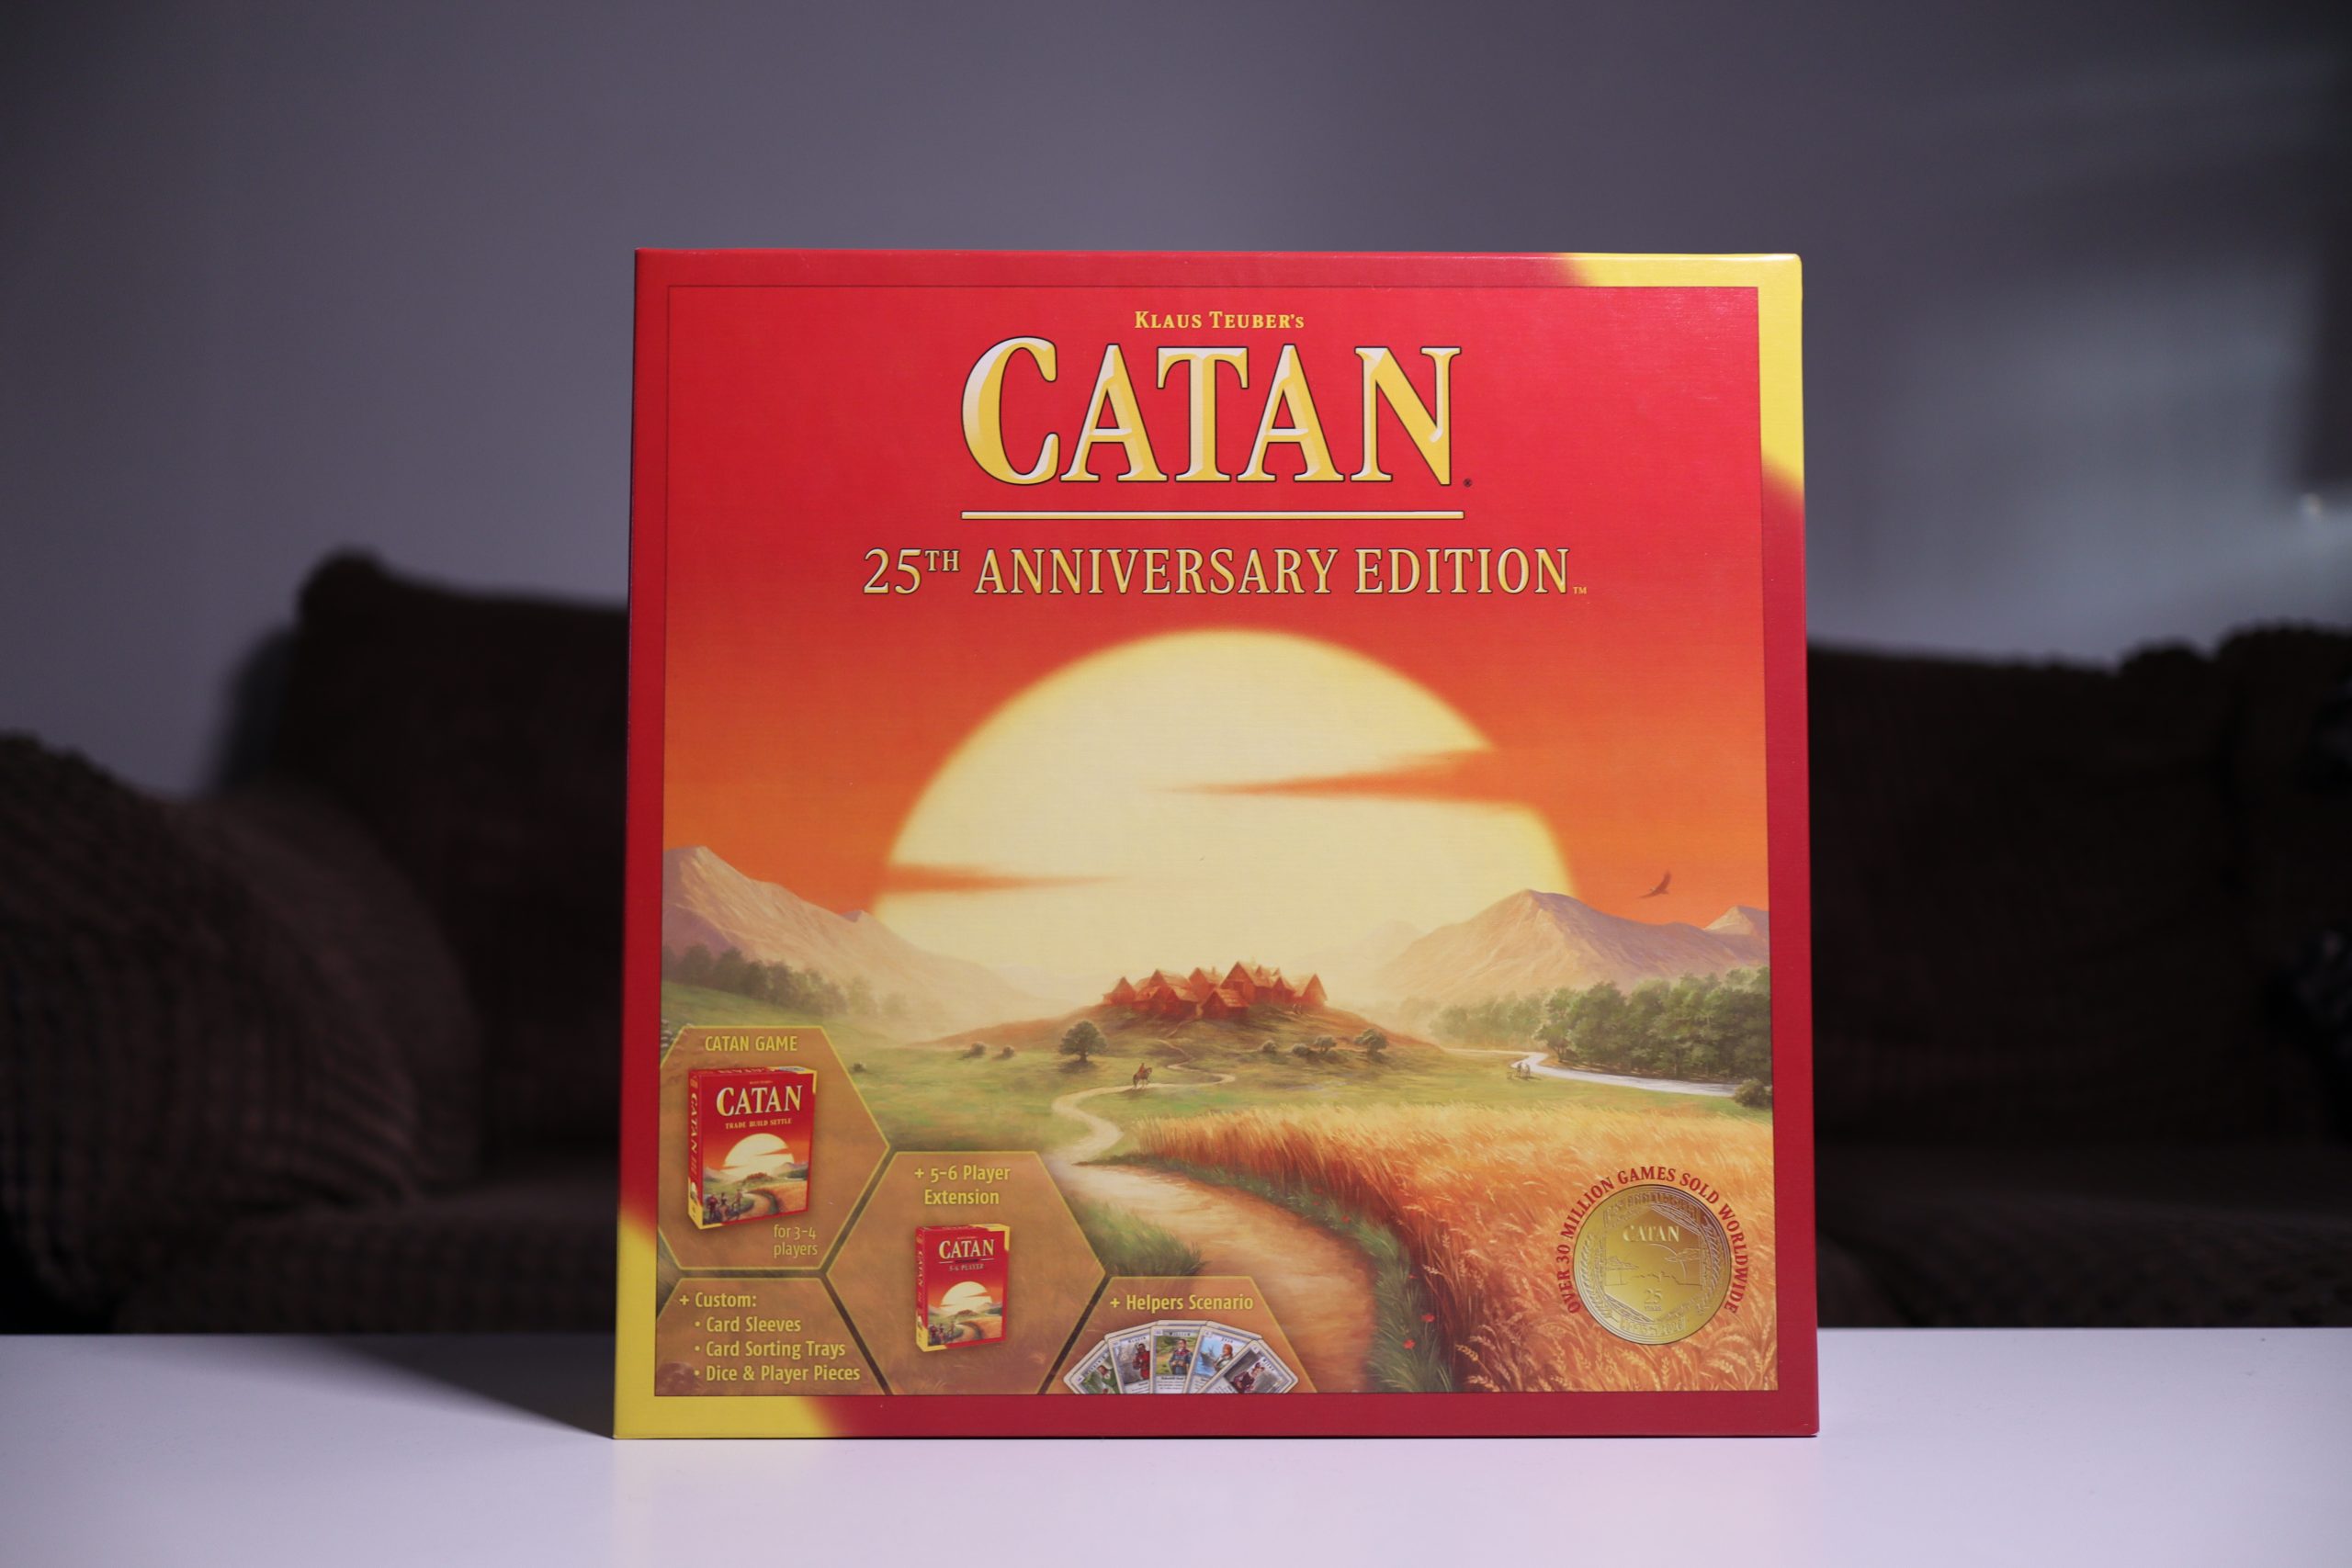 Catan 25th Anniversary Edition Review